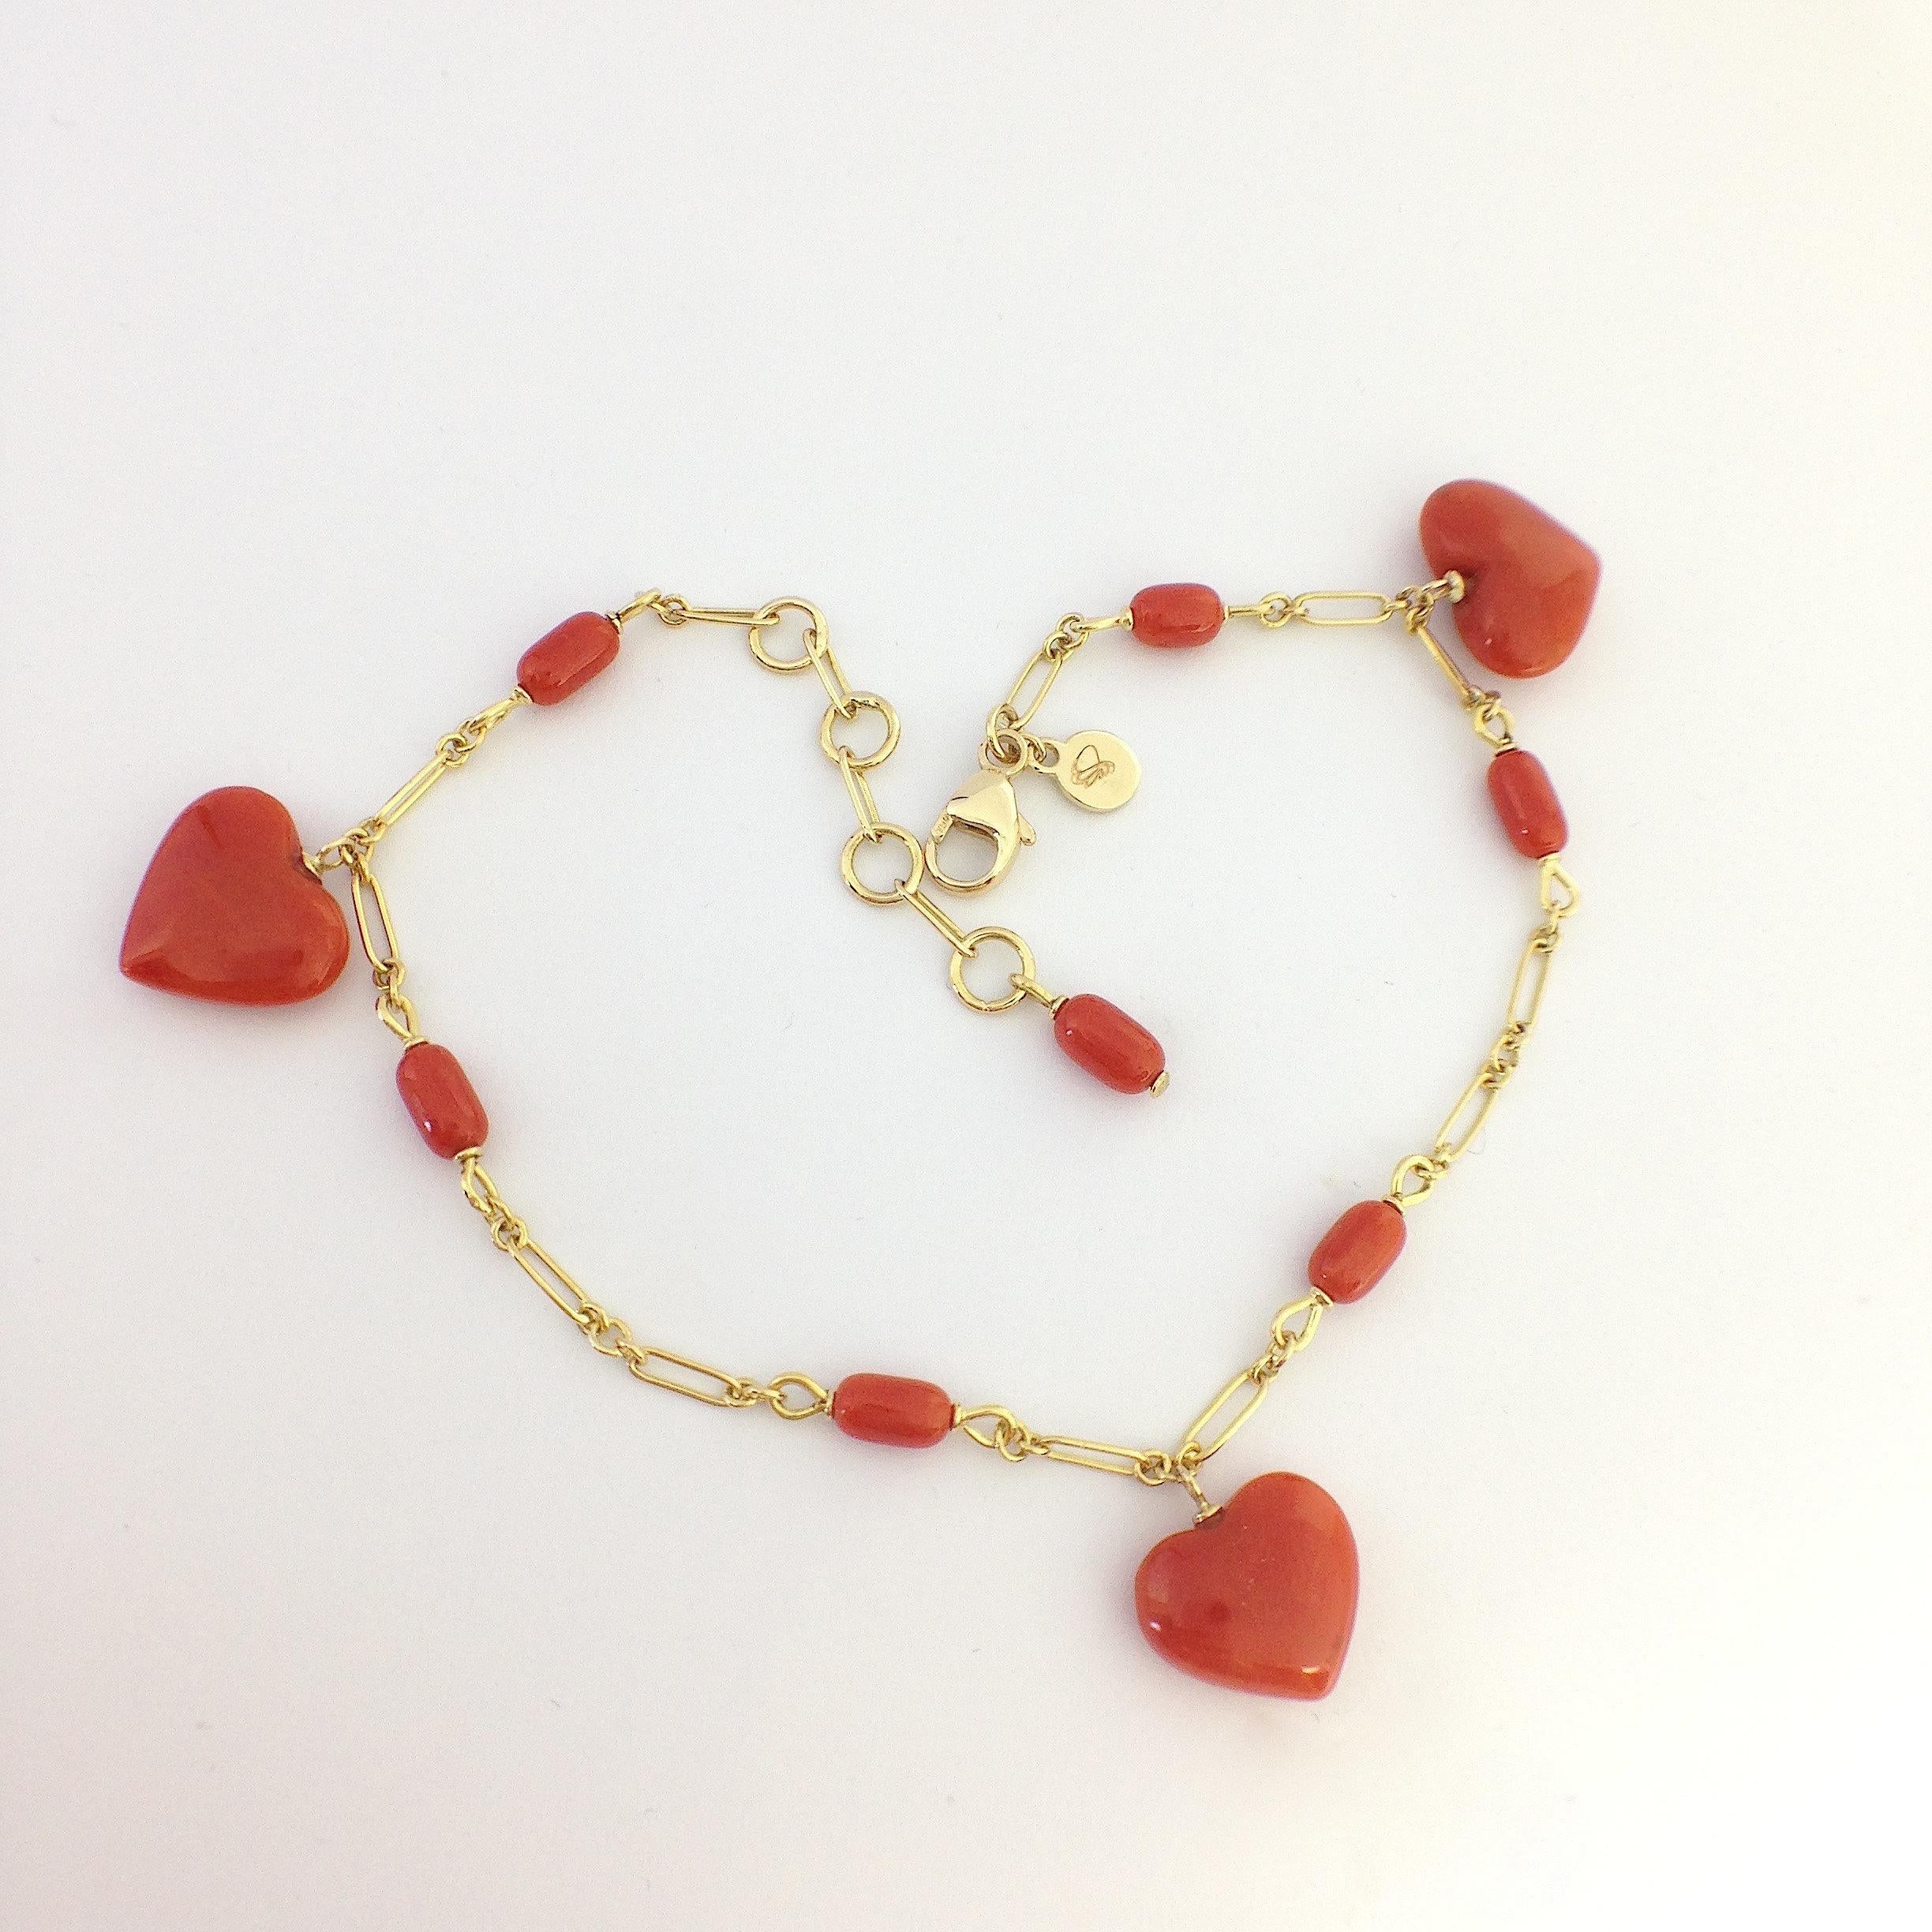 This bracelet is totally handmade in 18 kt gold.
It is interspersed with natural red coral oval beads (about mm 3x5) and three dangle natural red coral equidistant from each other.

As you can see on the picture, you can wear the bracelet from 18 
(